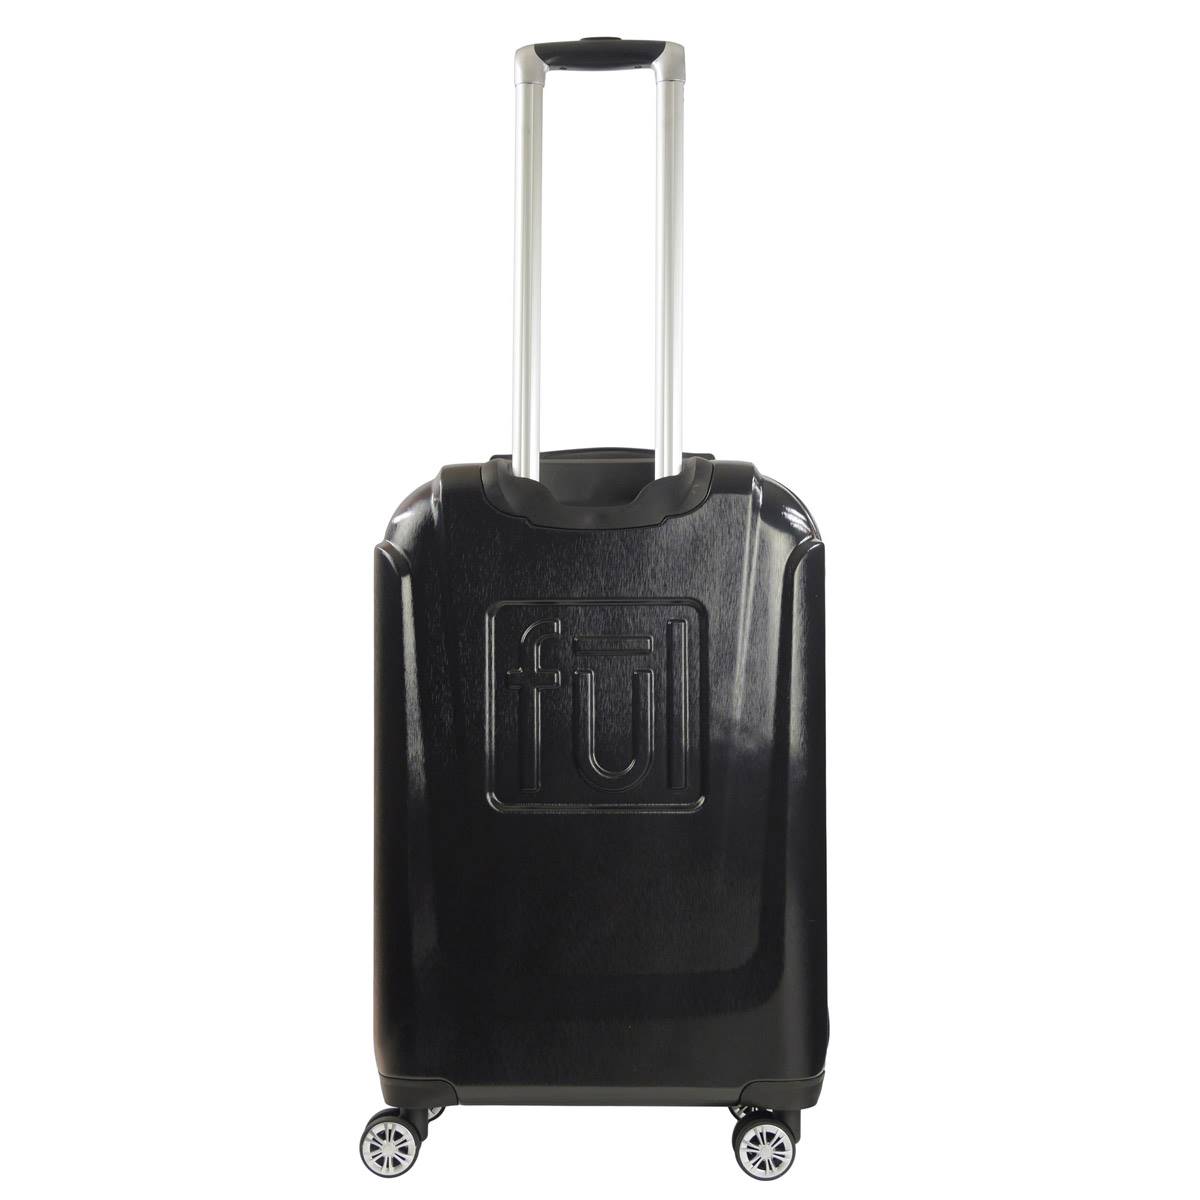 FUL Playful Minnie Mouse 26in. Hardside Spinner Luggage